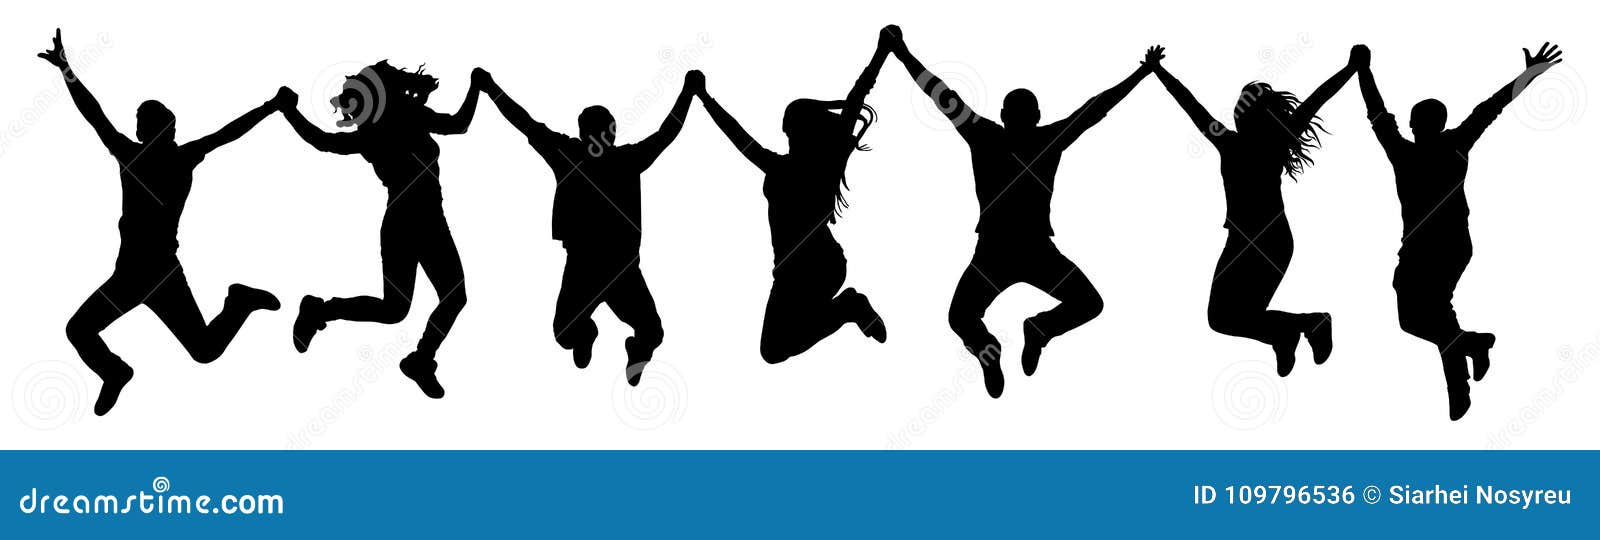 people holding hands in a jump silhouette. funny friends jump background.